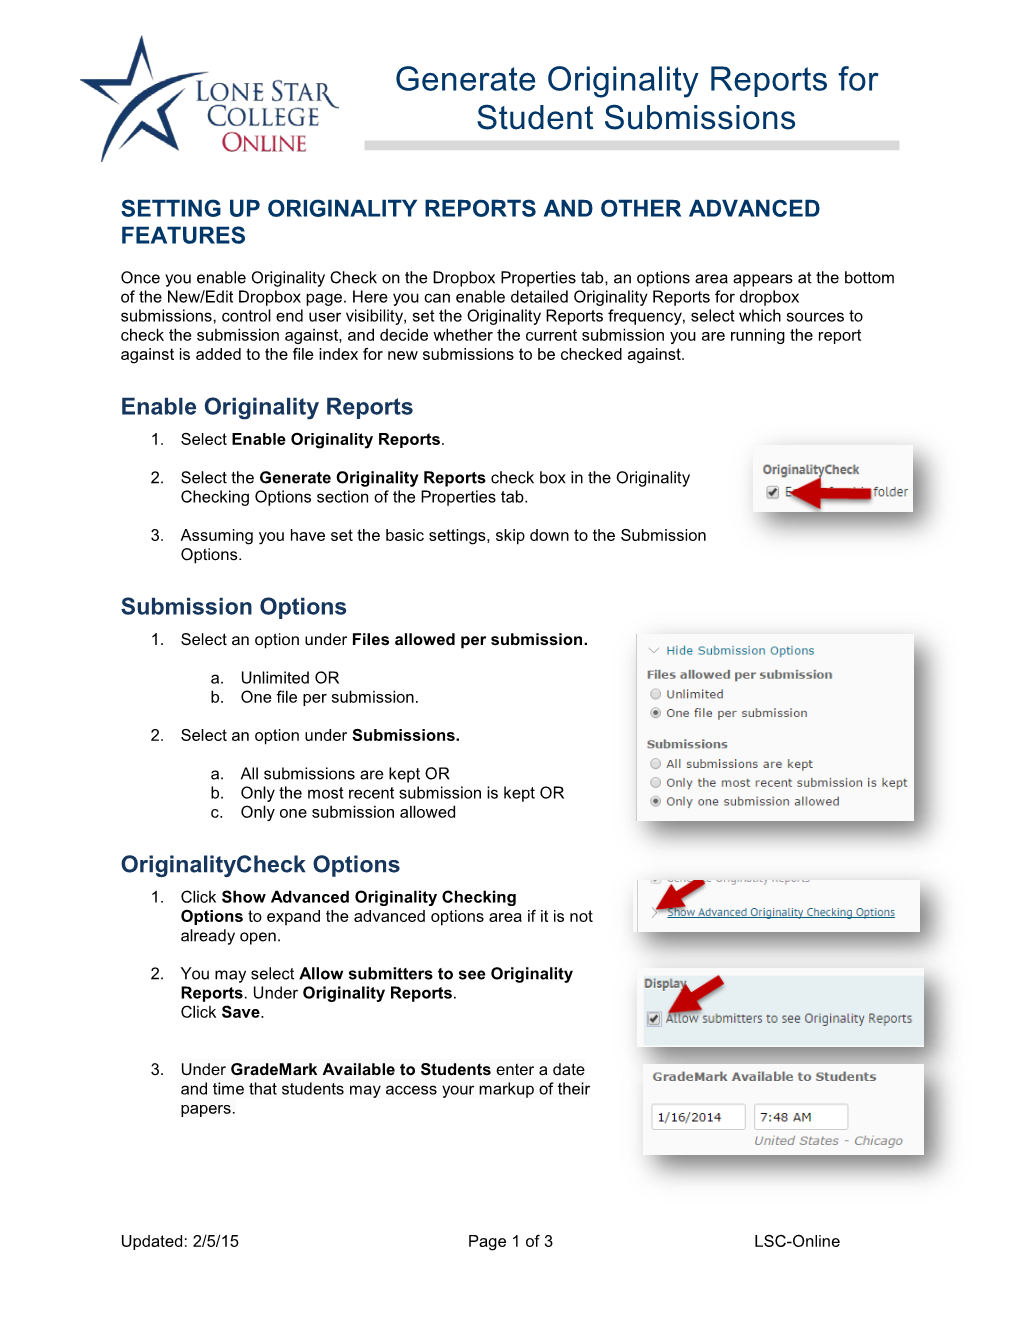 Generate Originality Reports for Student Submissions